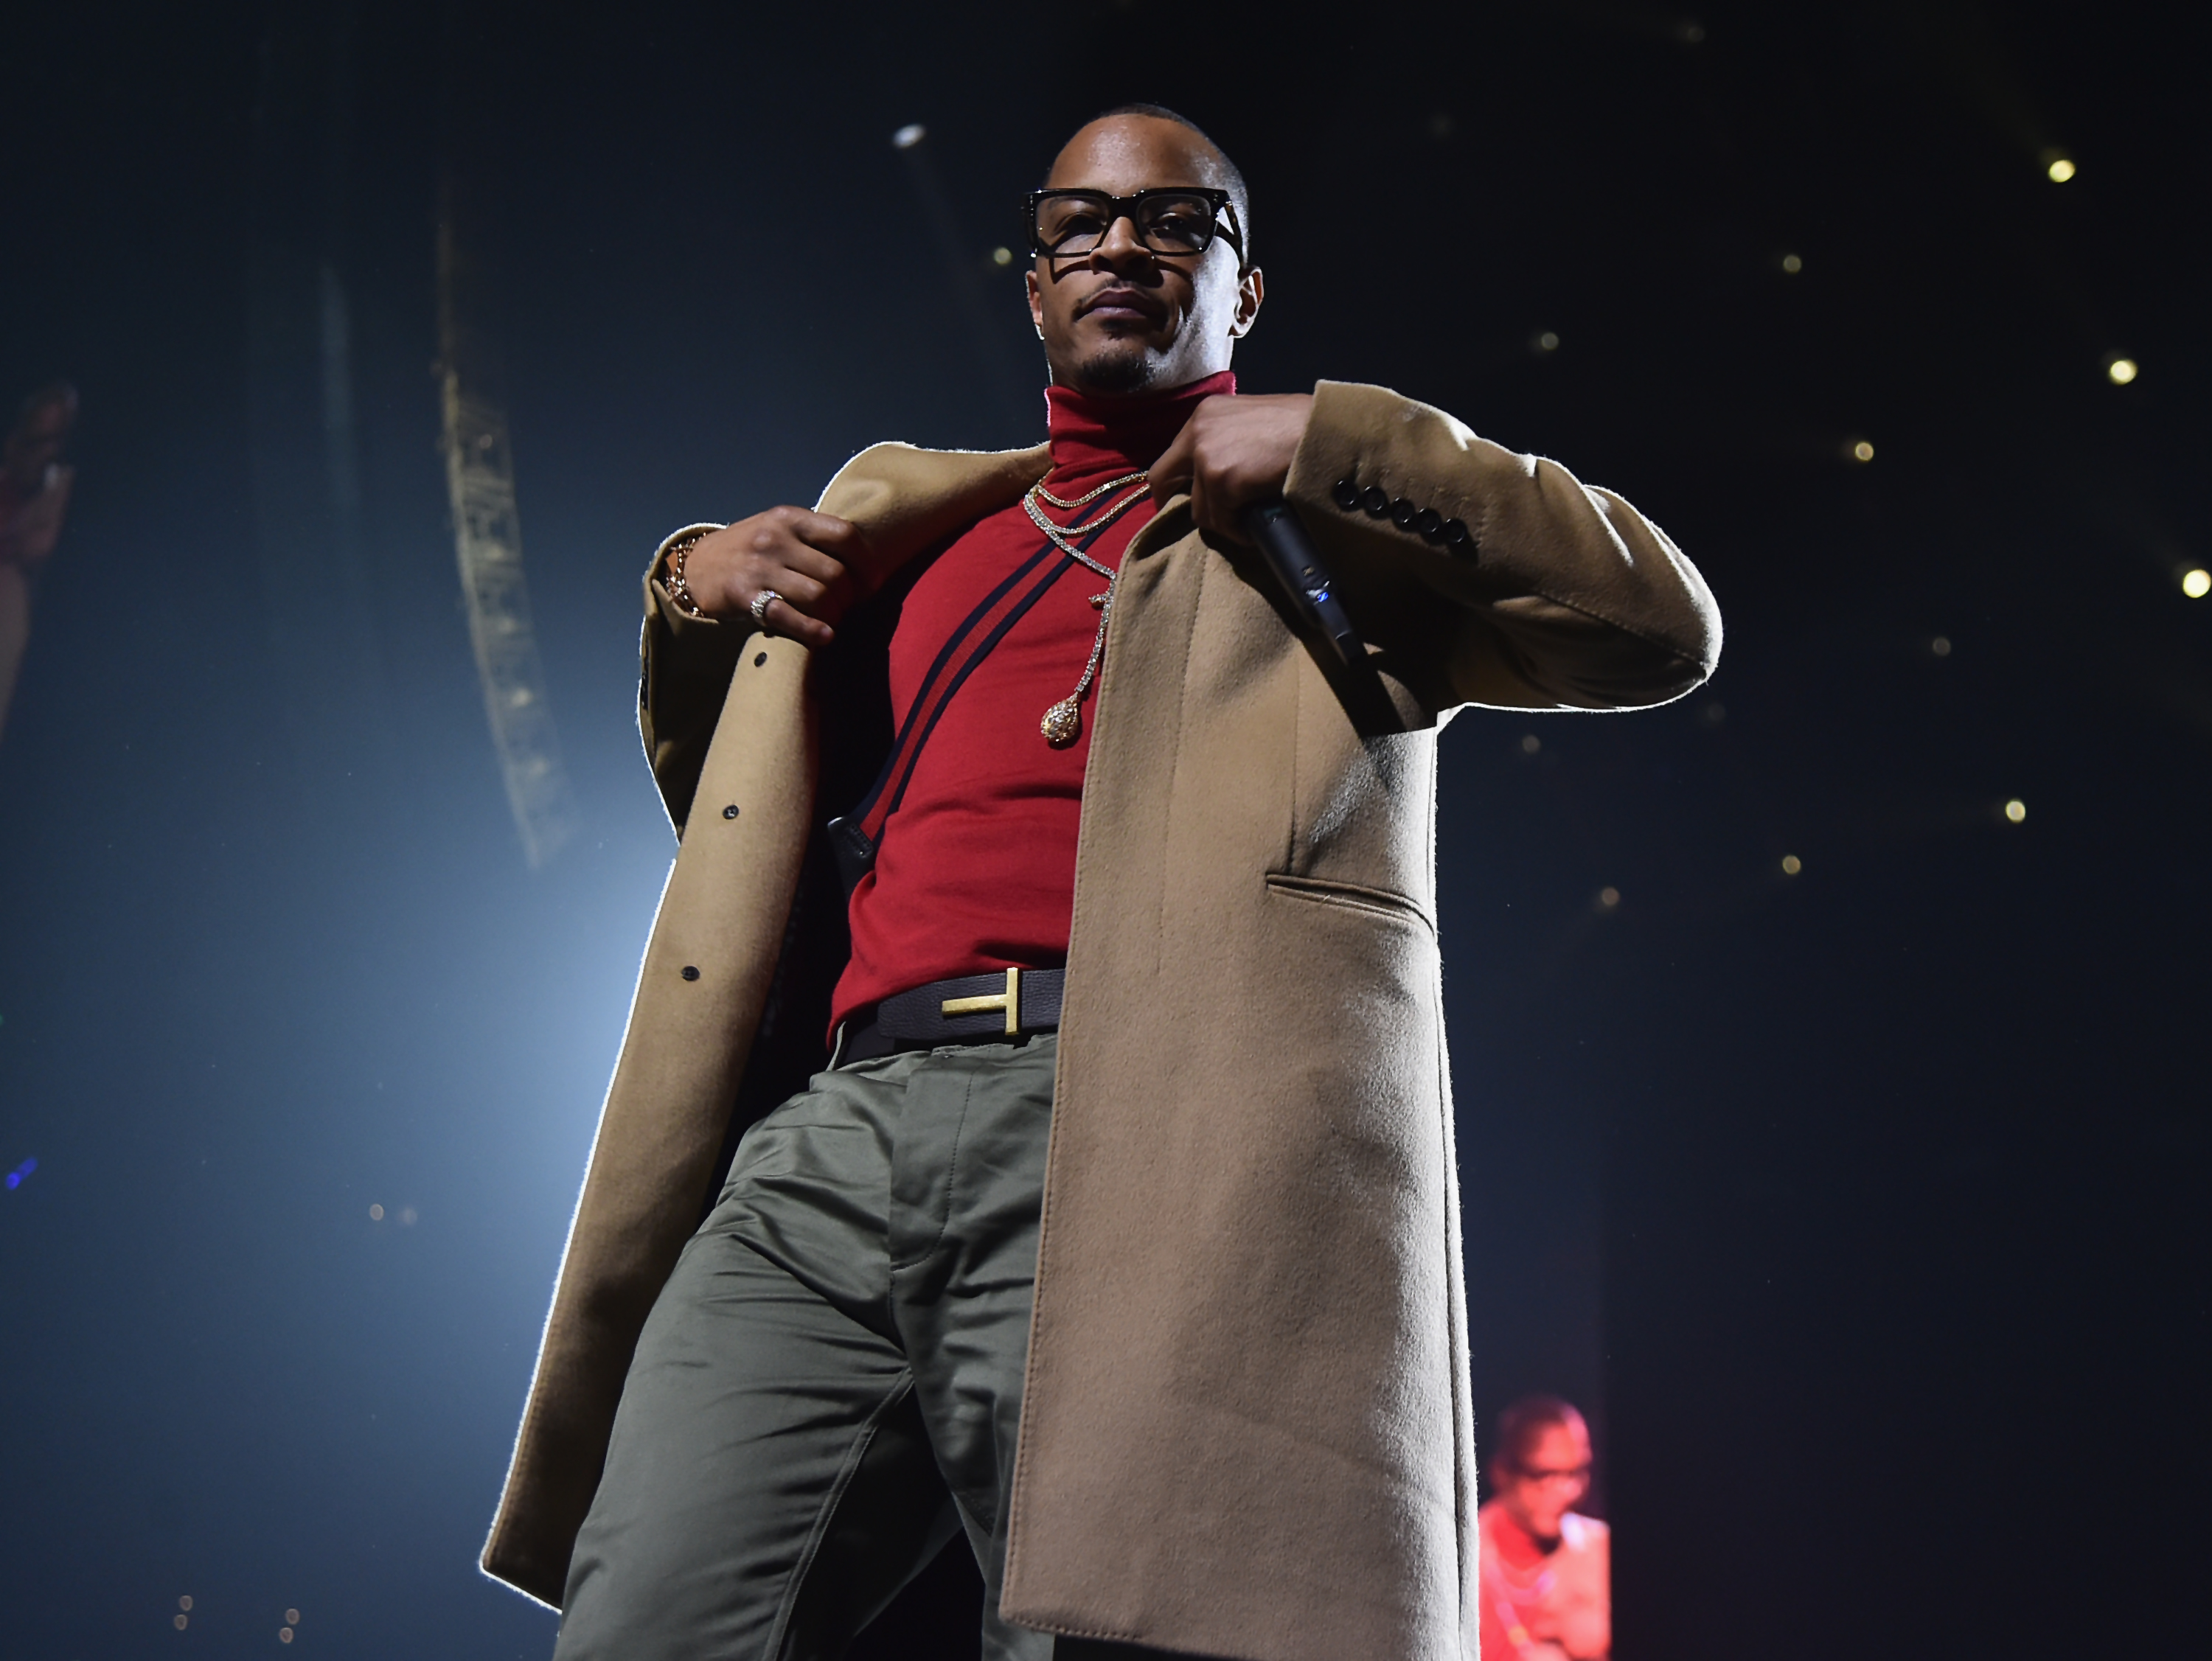 T.I. arrested for drunken altercation with security guard